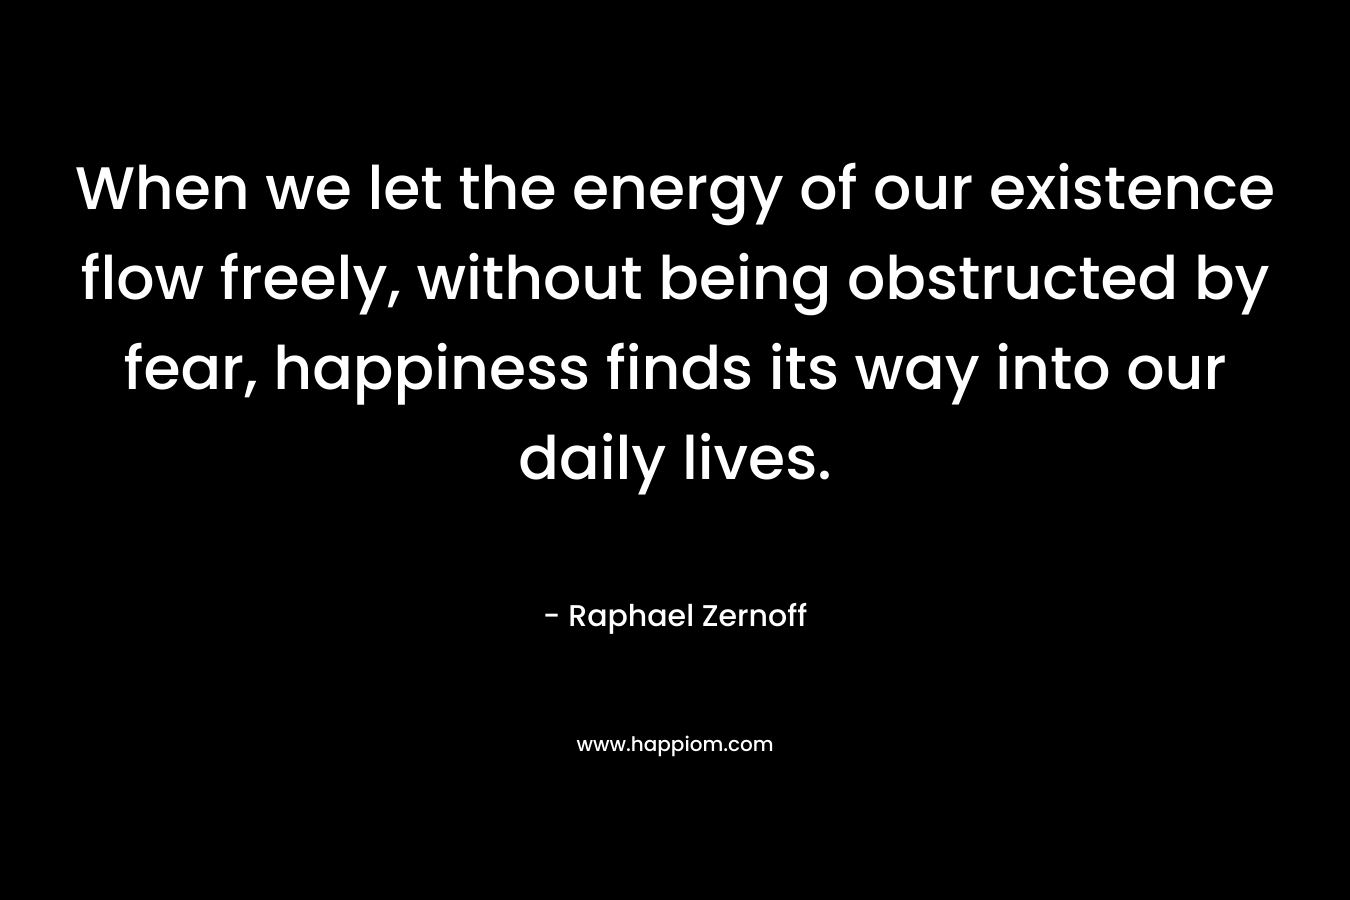 When we let the energy of our existence flow freely, without being obstructed by fear, happiness finds its way into our daily lives.